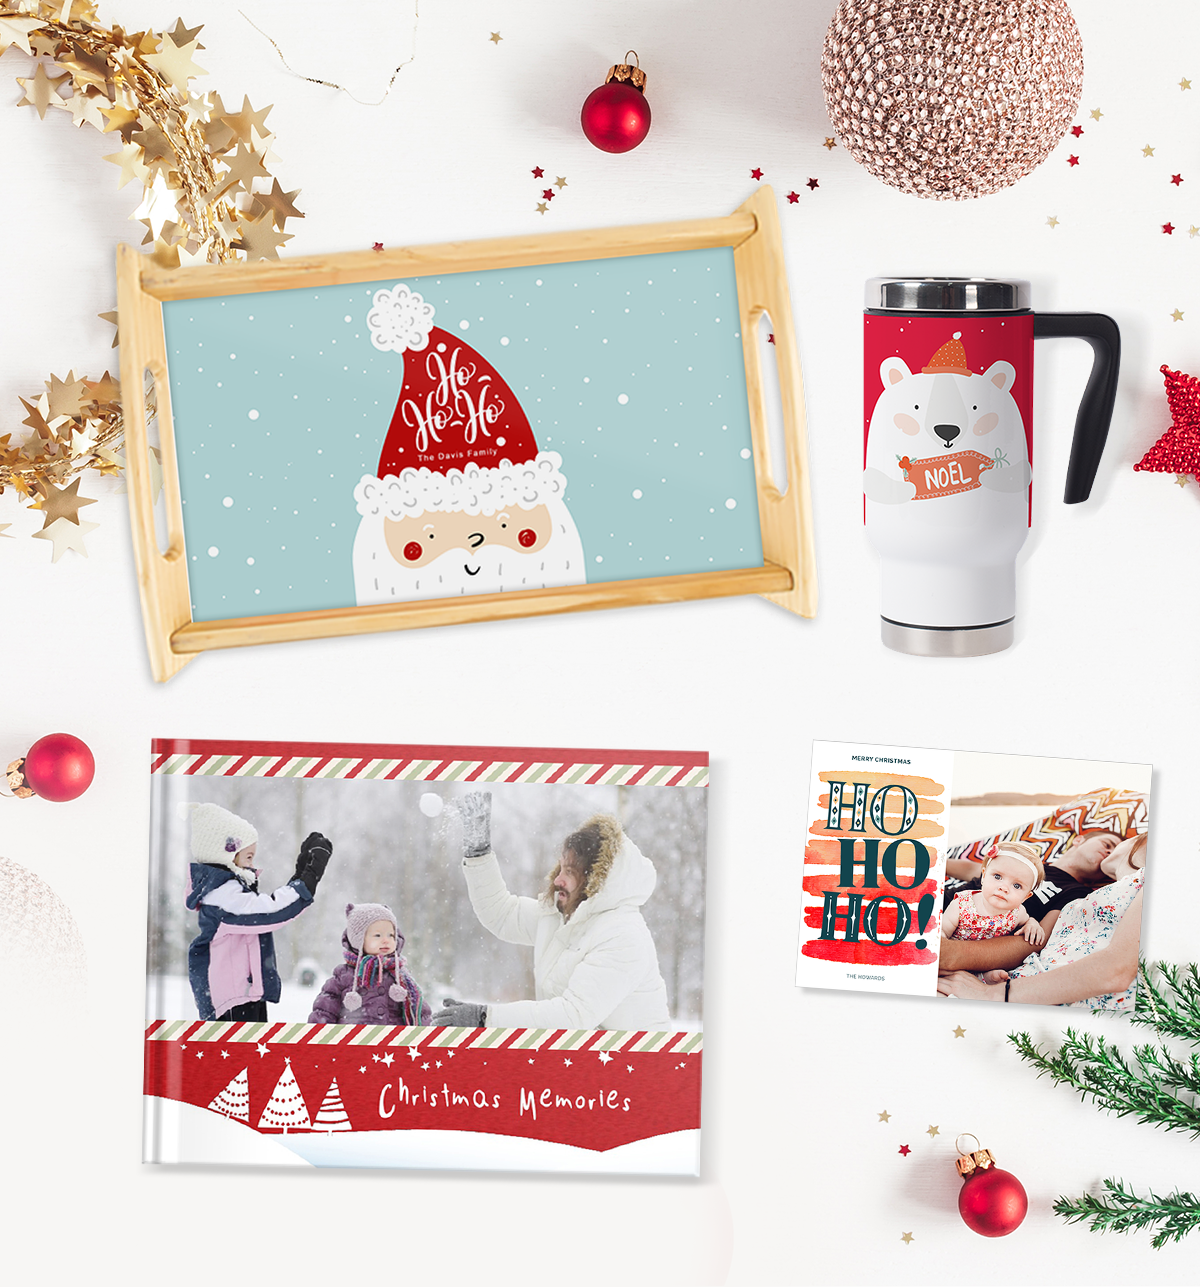 Photobook's Christmas products